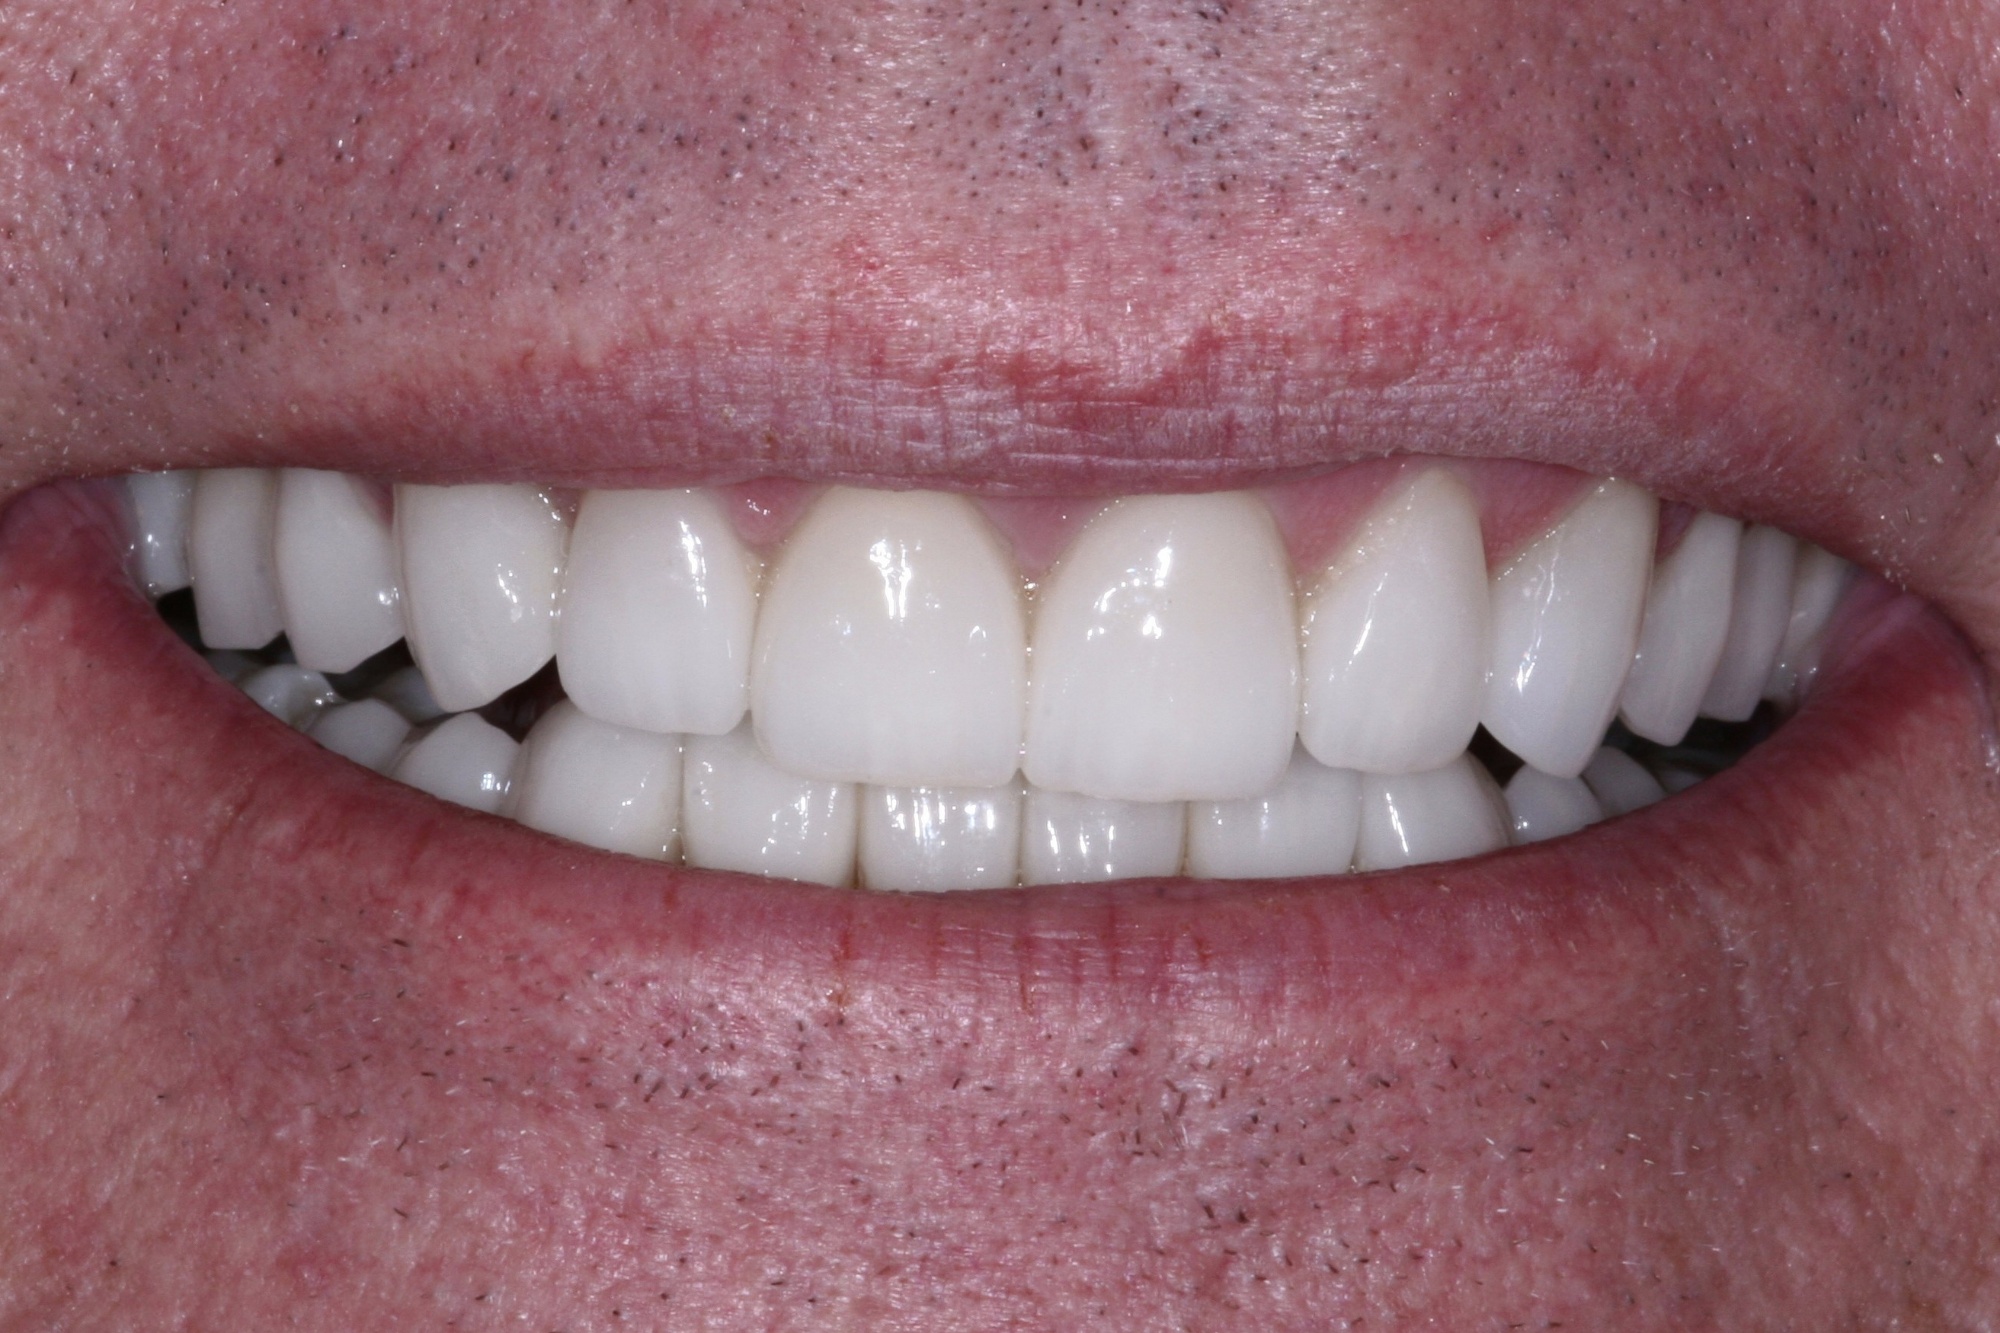 Steve's Smile After Cosmetic Dentistry Treatment